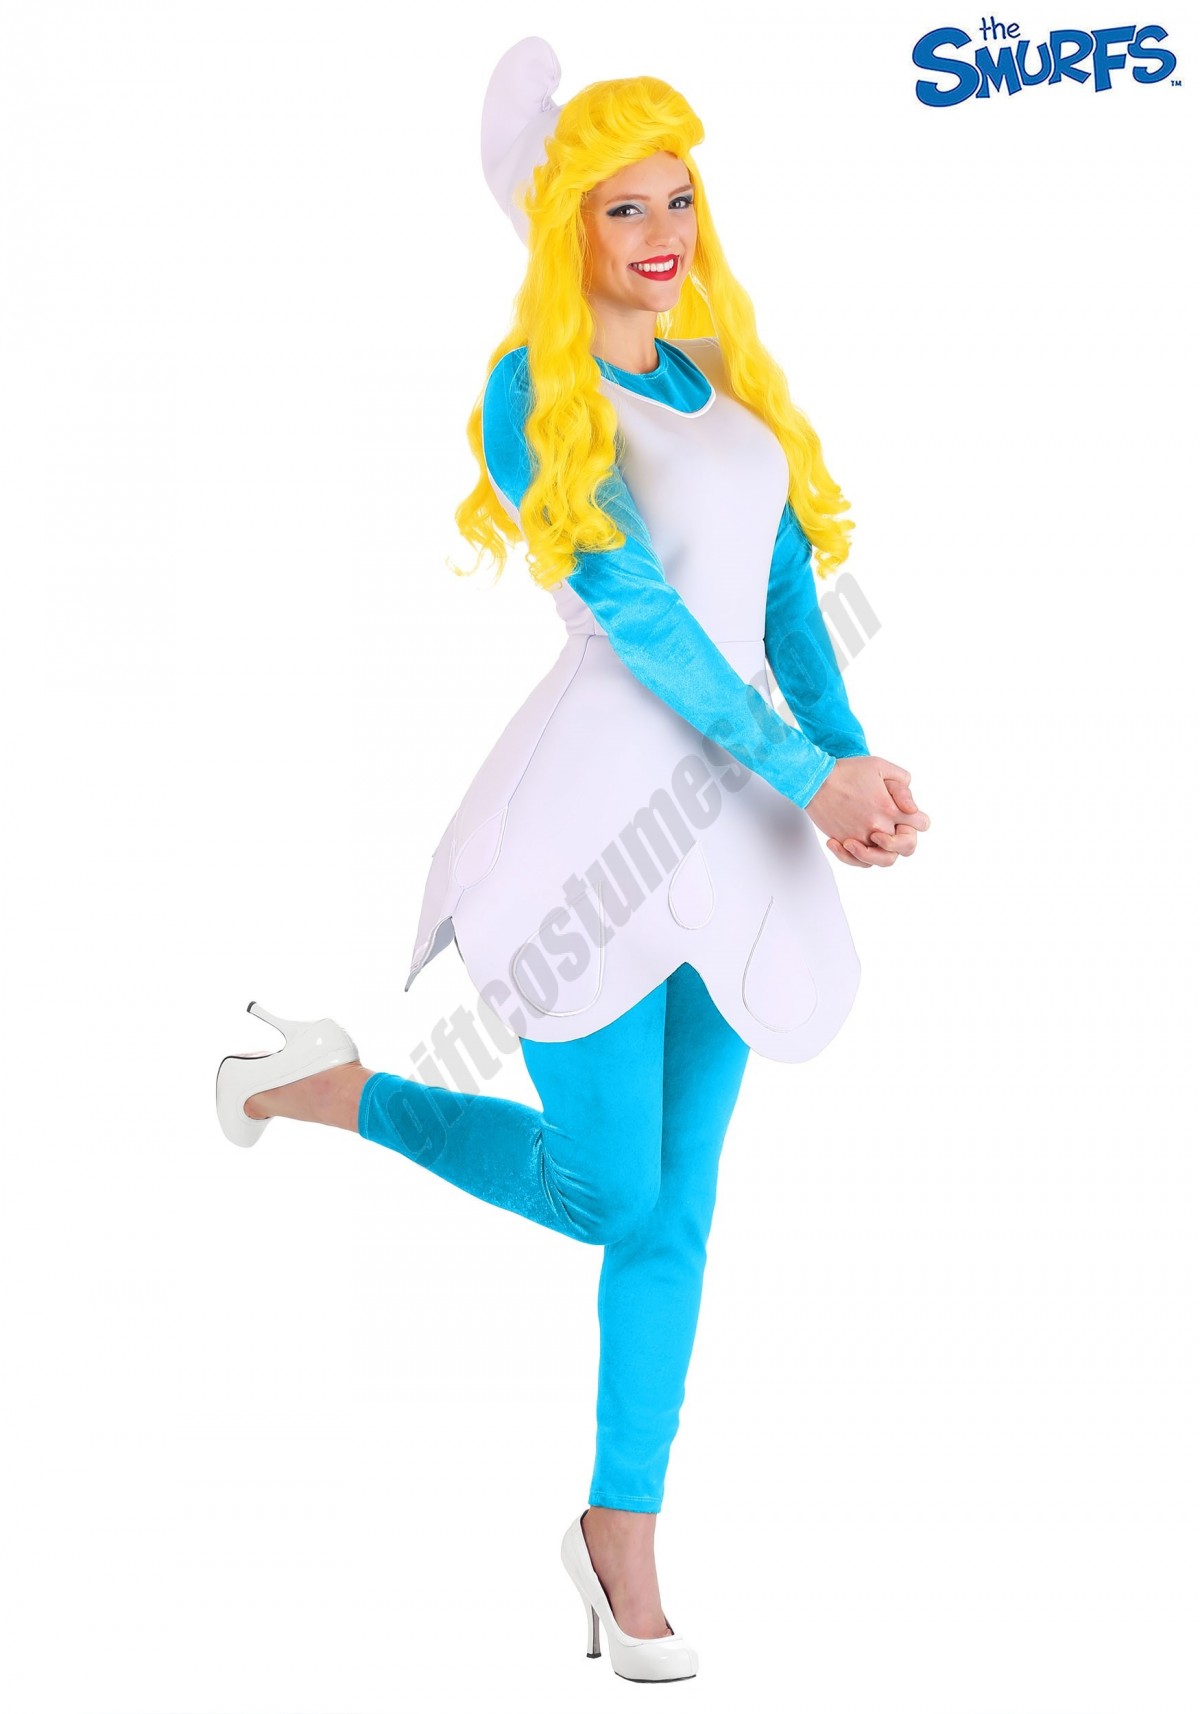 The Smurfs Women's Smurfette Costume Promotions - -0